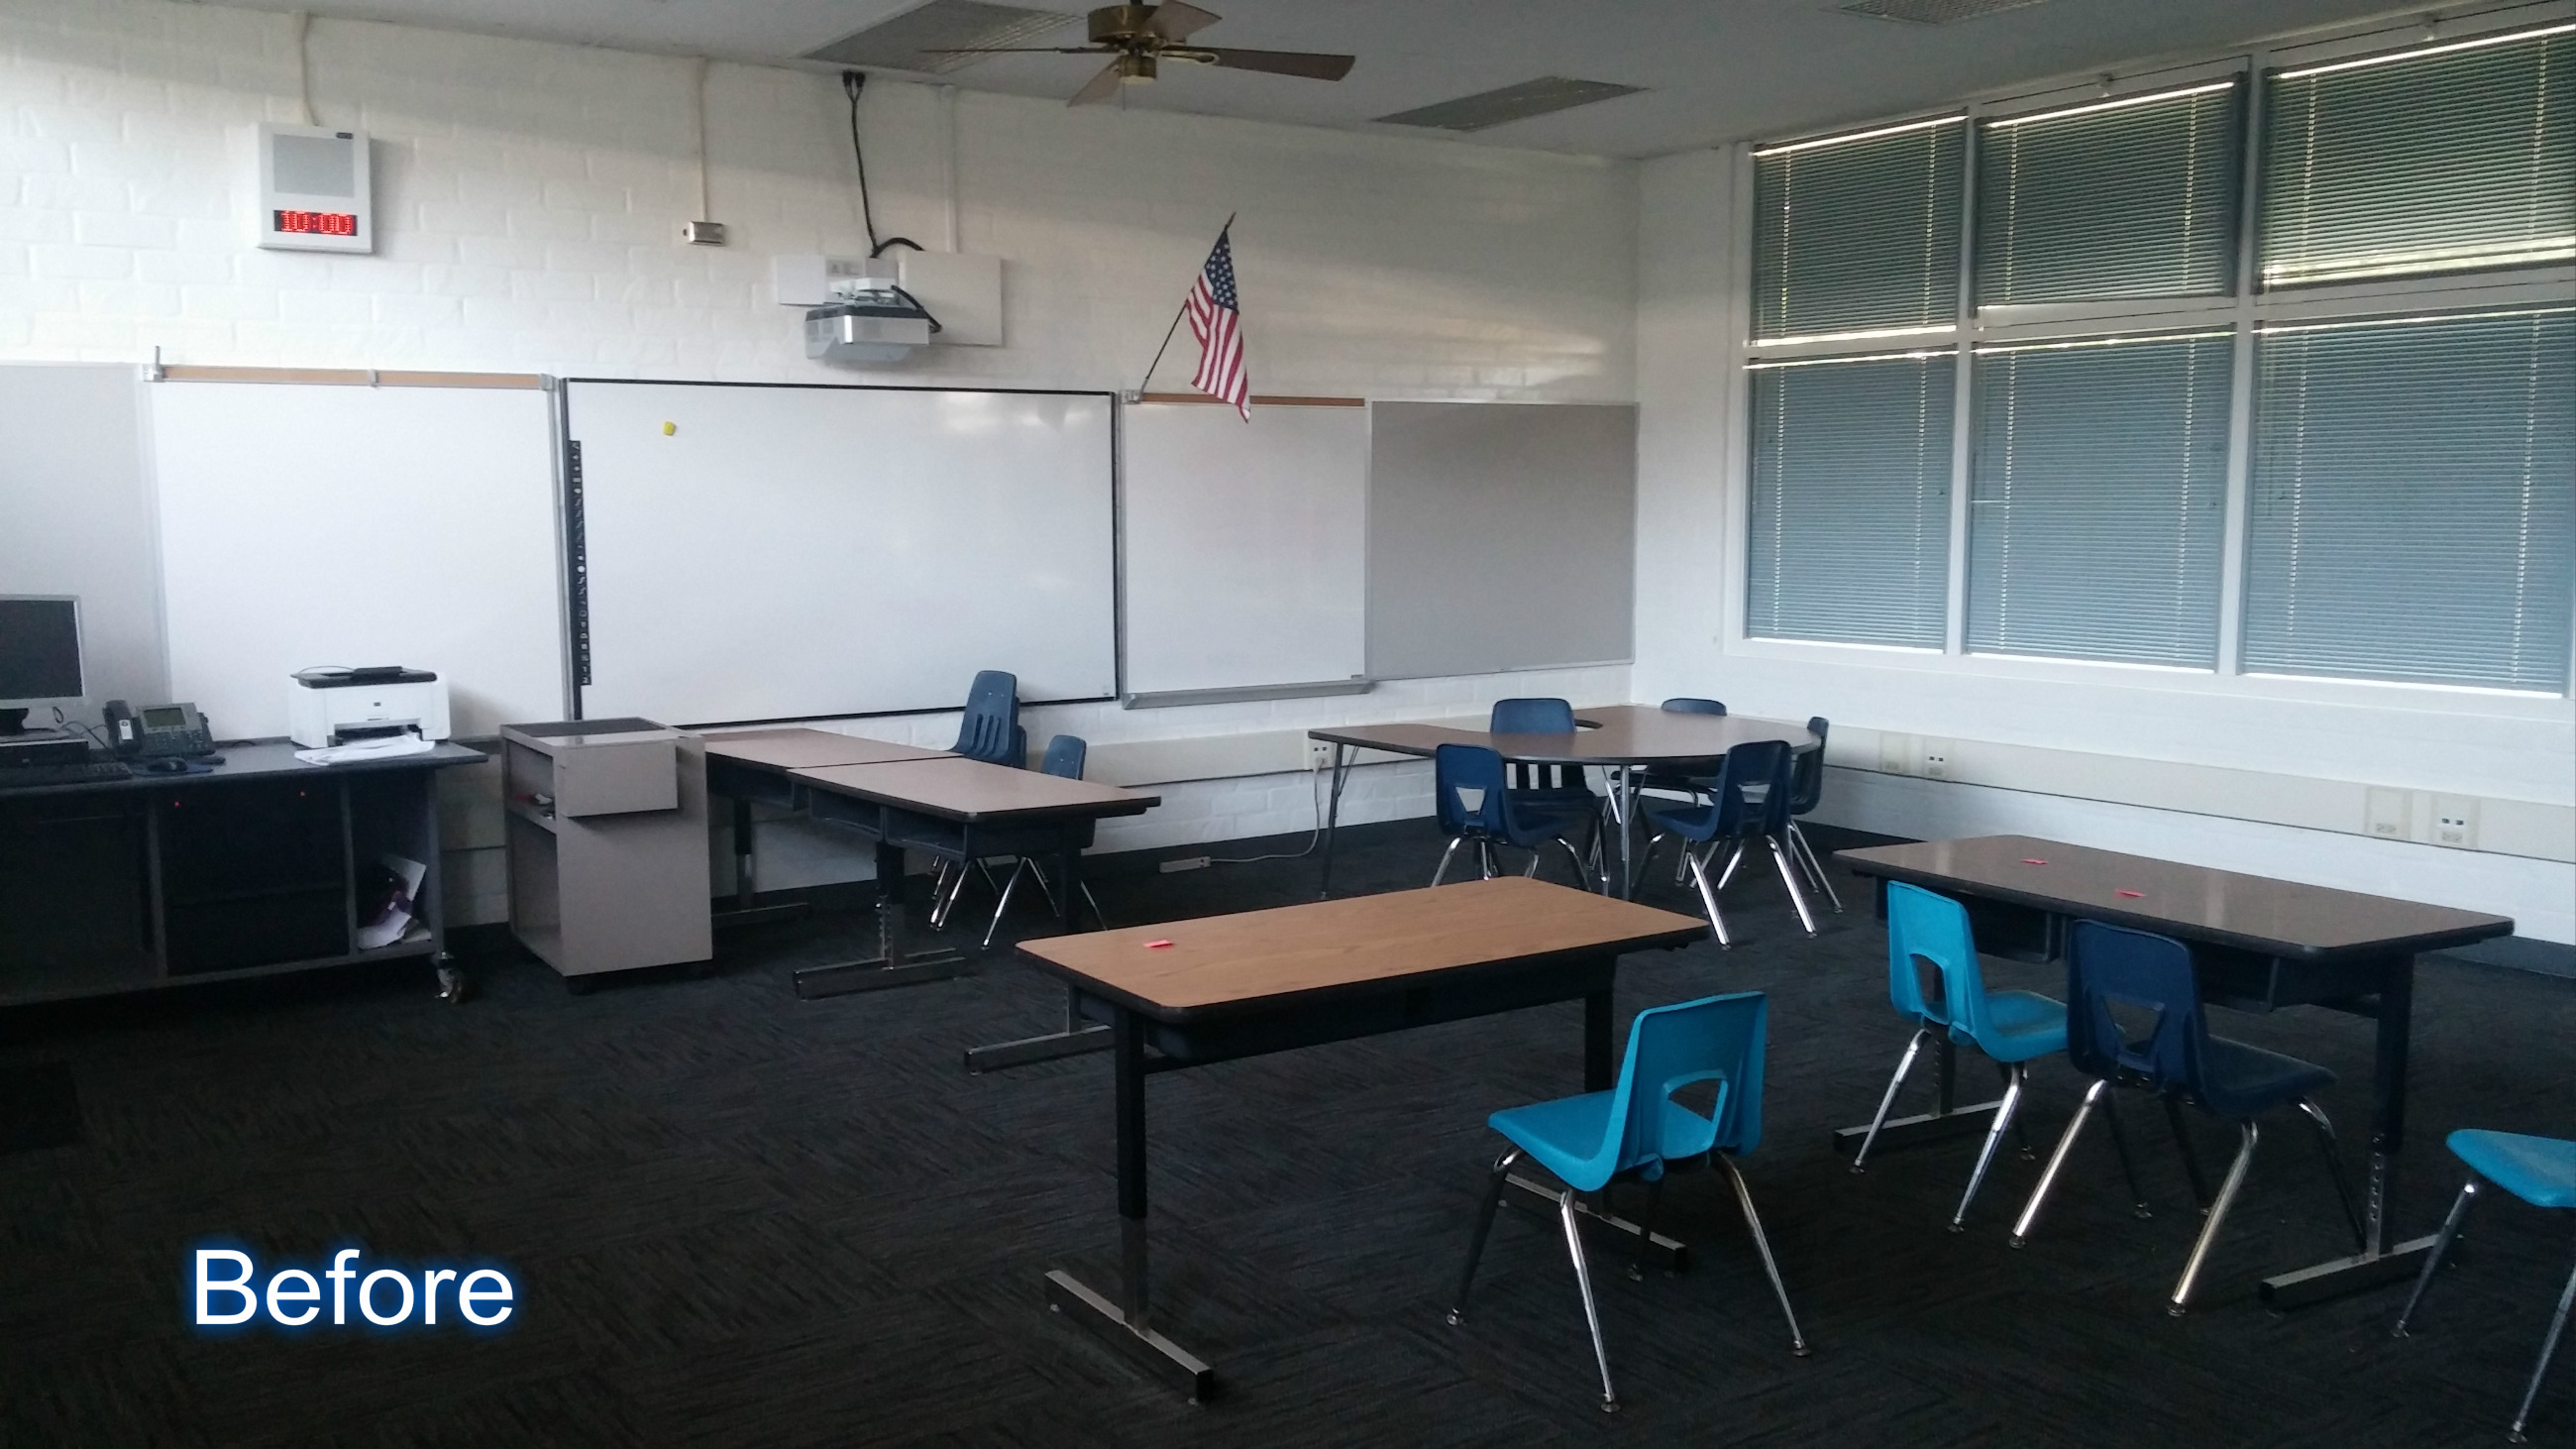 An open classroom with tables and chairs for the teacher and students